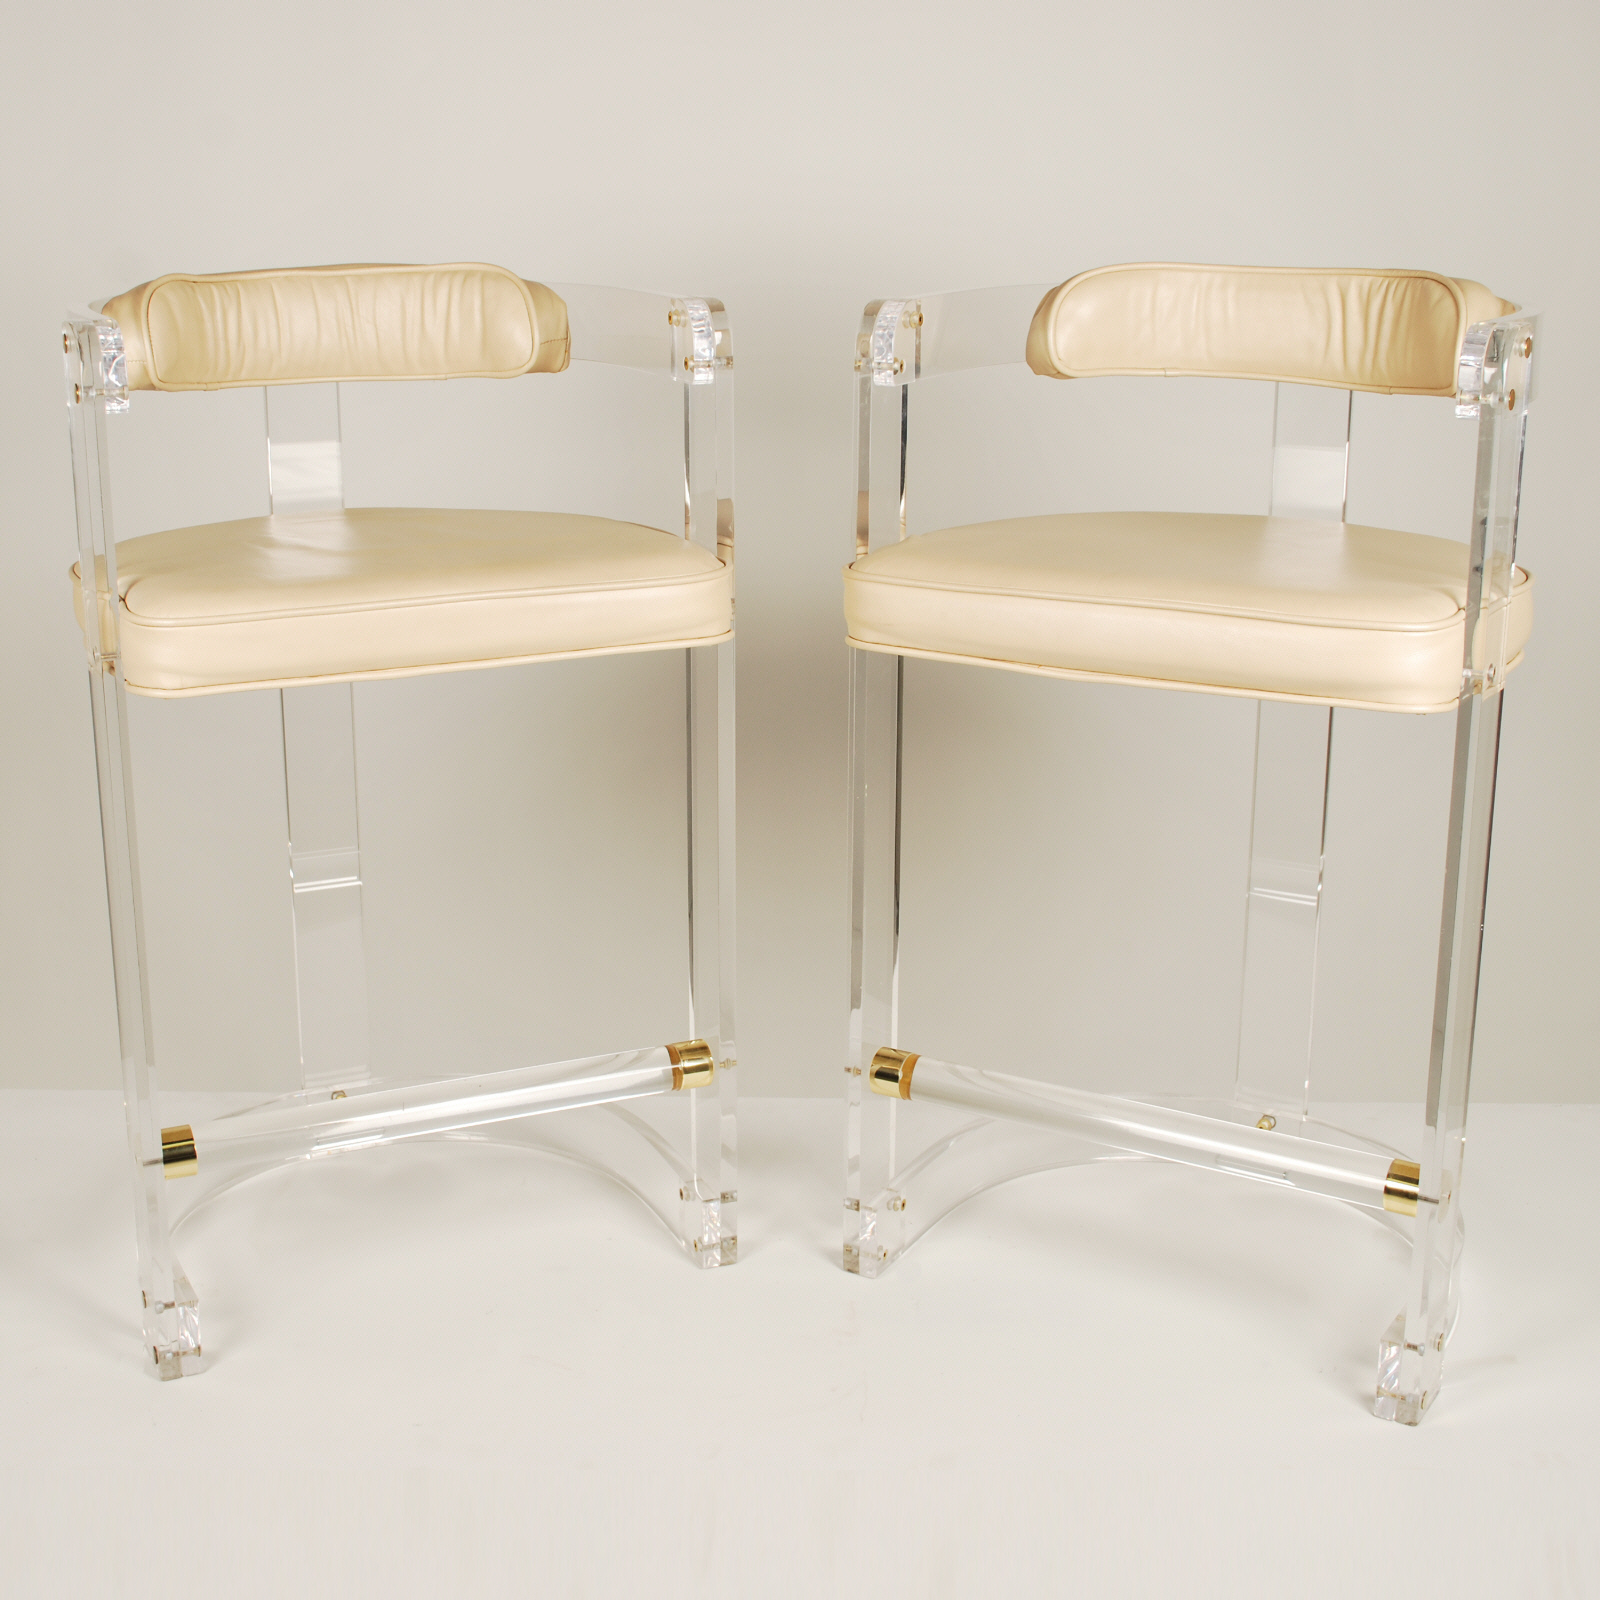 Pair of vintage lucite bar stools